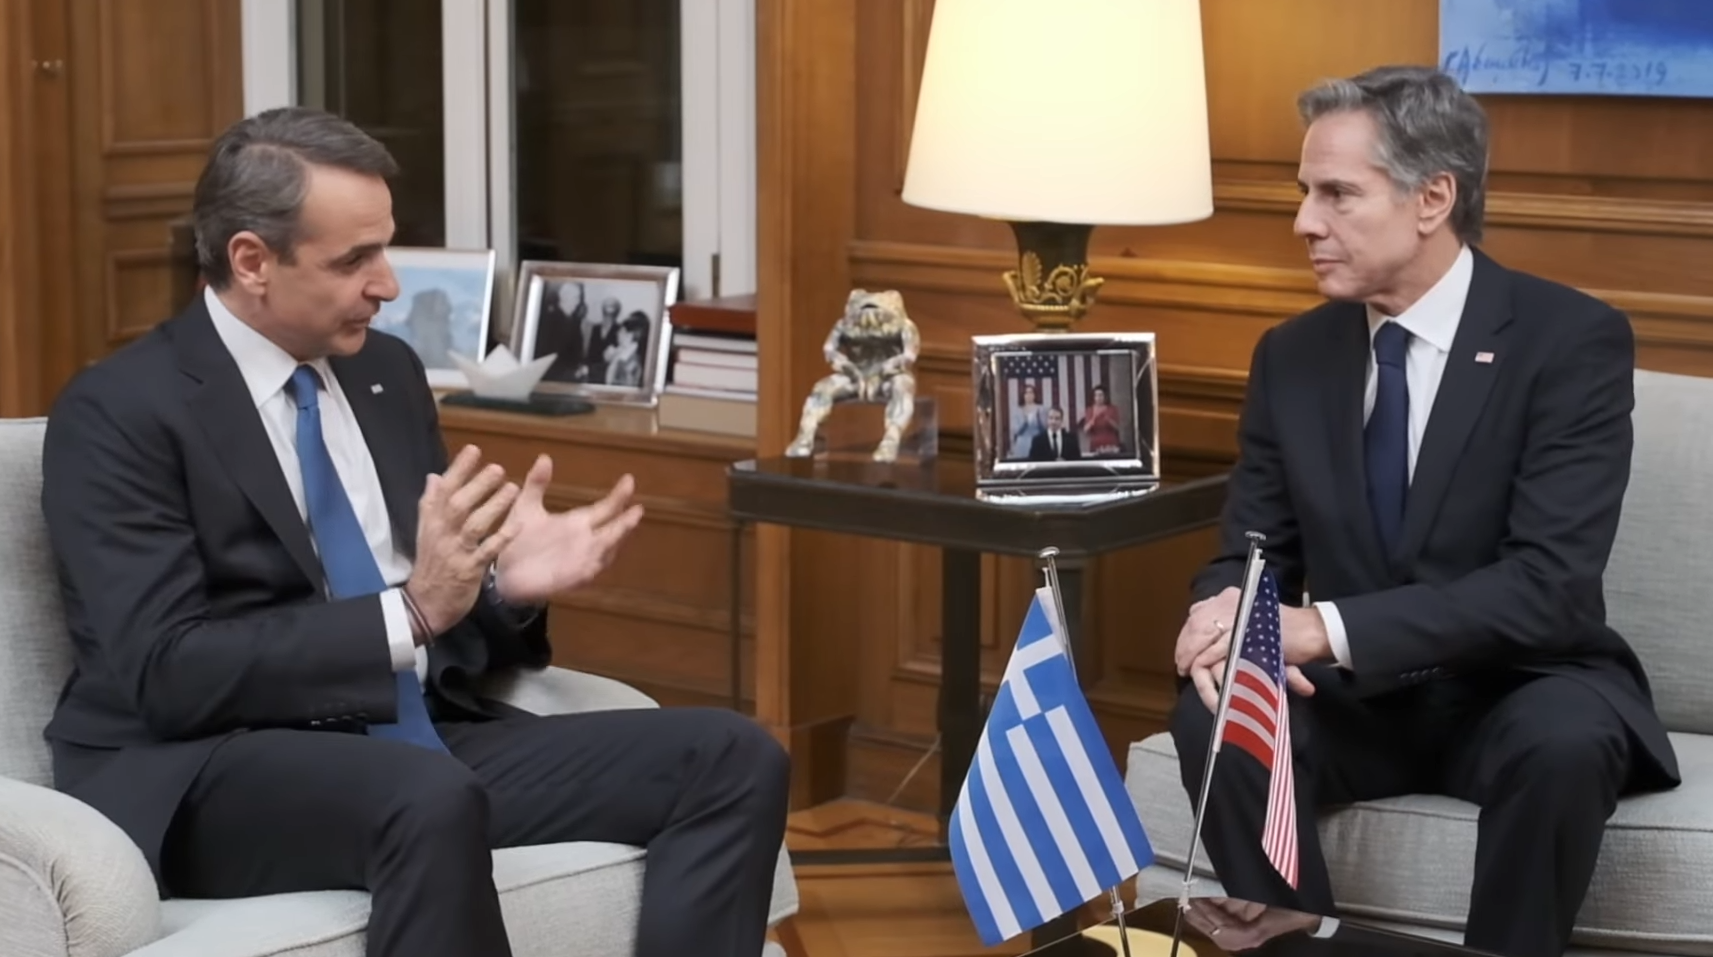 Greek Prime Minister Kyriakos Mitsotakis is seen speaking with US Secretary of State Anthony Blinken. They' re sat across each other, with a table in the middle decorated with the Greek and US flags.